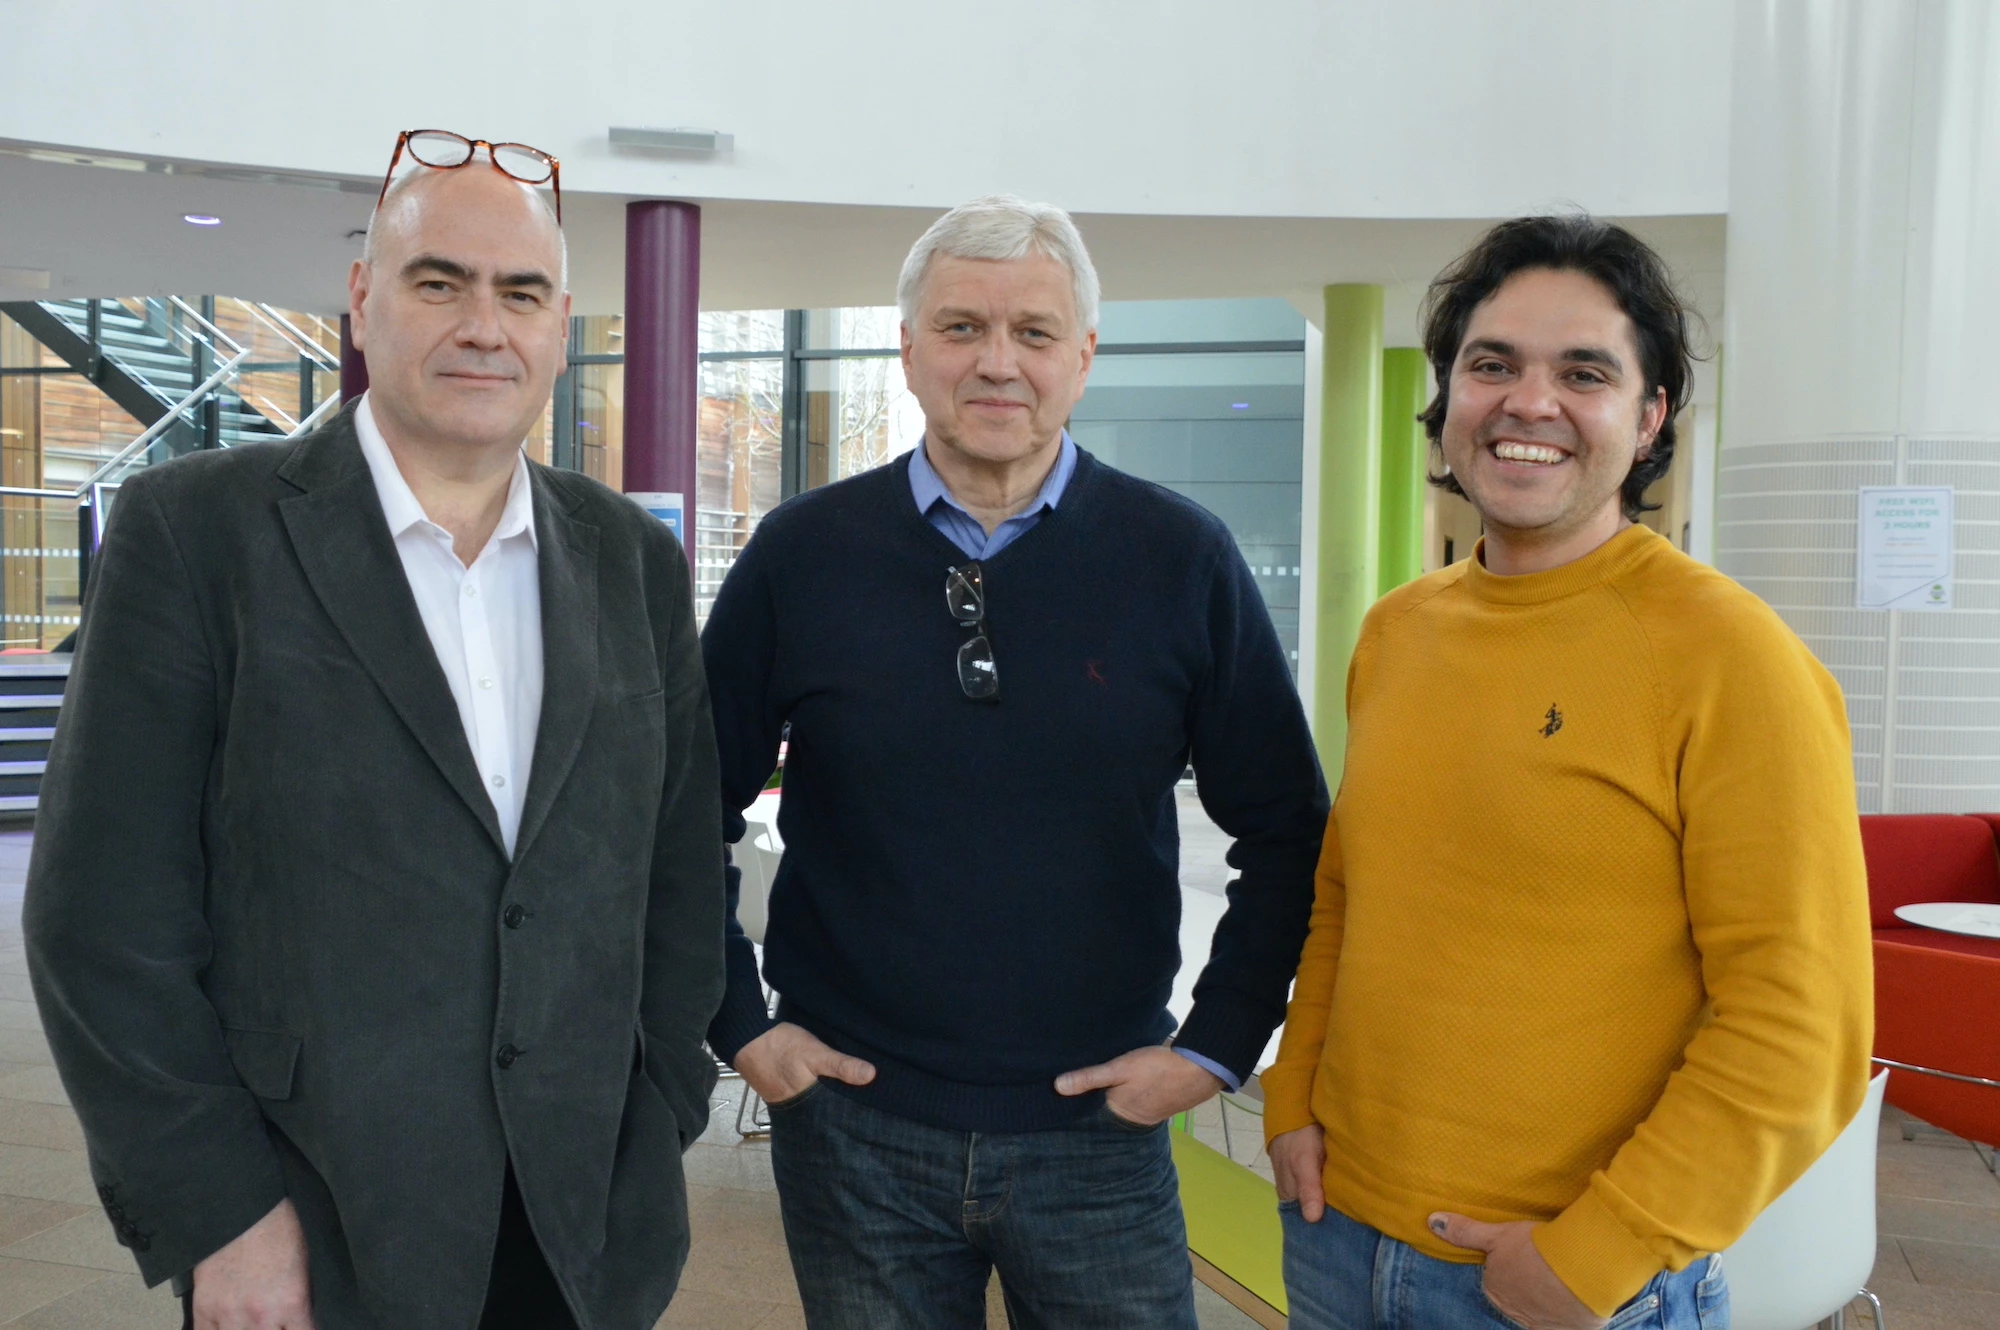 DALUS Founder and Director, Spencer Taylor, from Shropshire, Ruben Riano from Bristol (LEFT) and Garry Martin from Croydon (RIGHT).